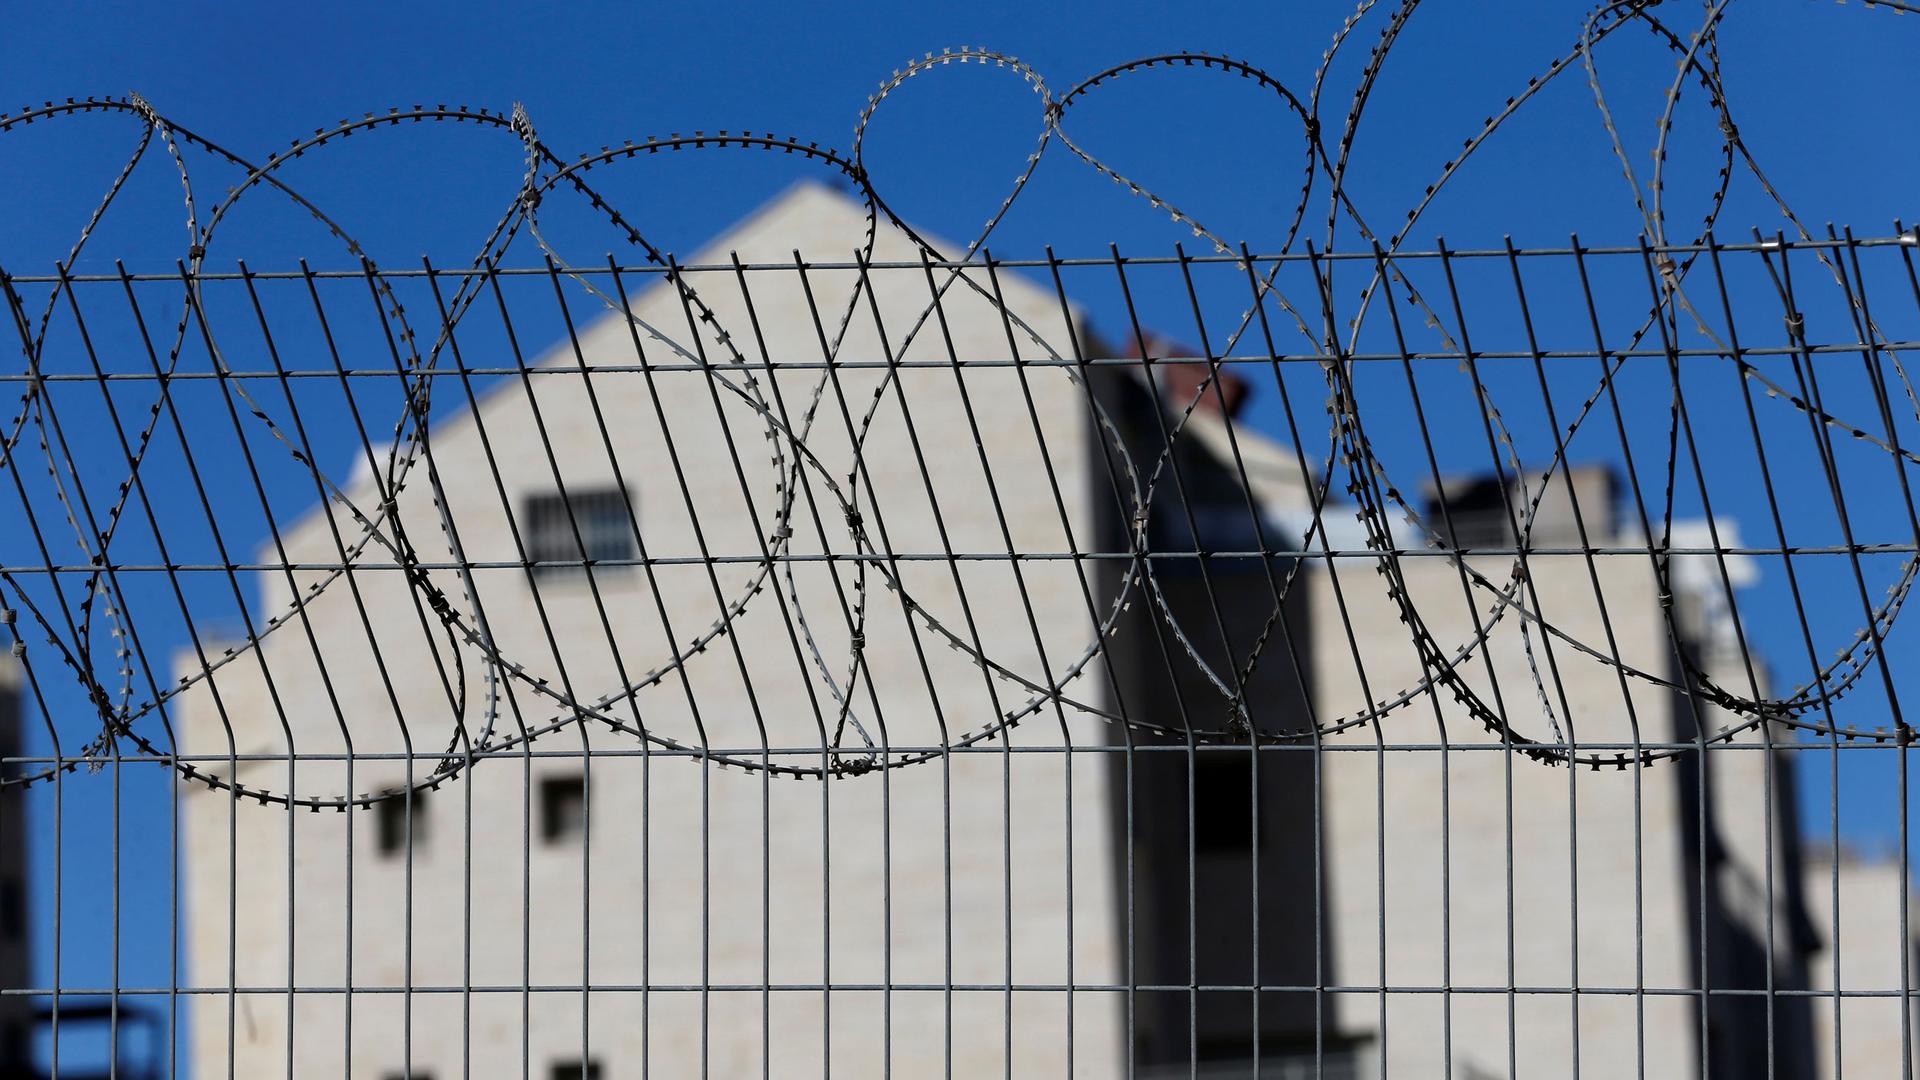 A fence is seen at the Jewish settlement of Kiryat Arba in Hebron, in the Israeli-occupied West Bank.